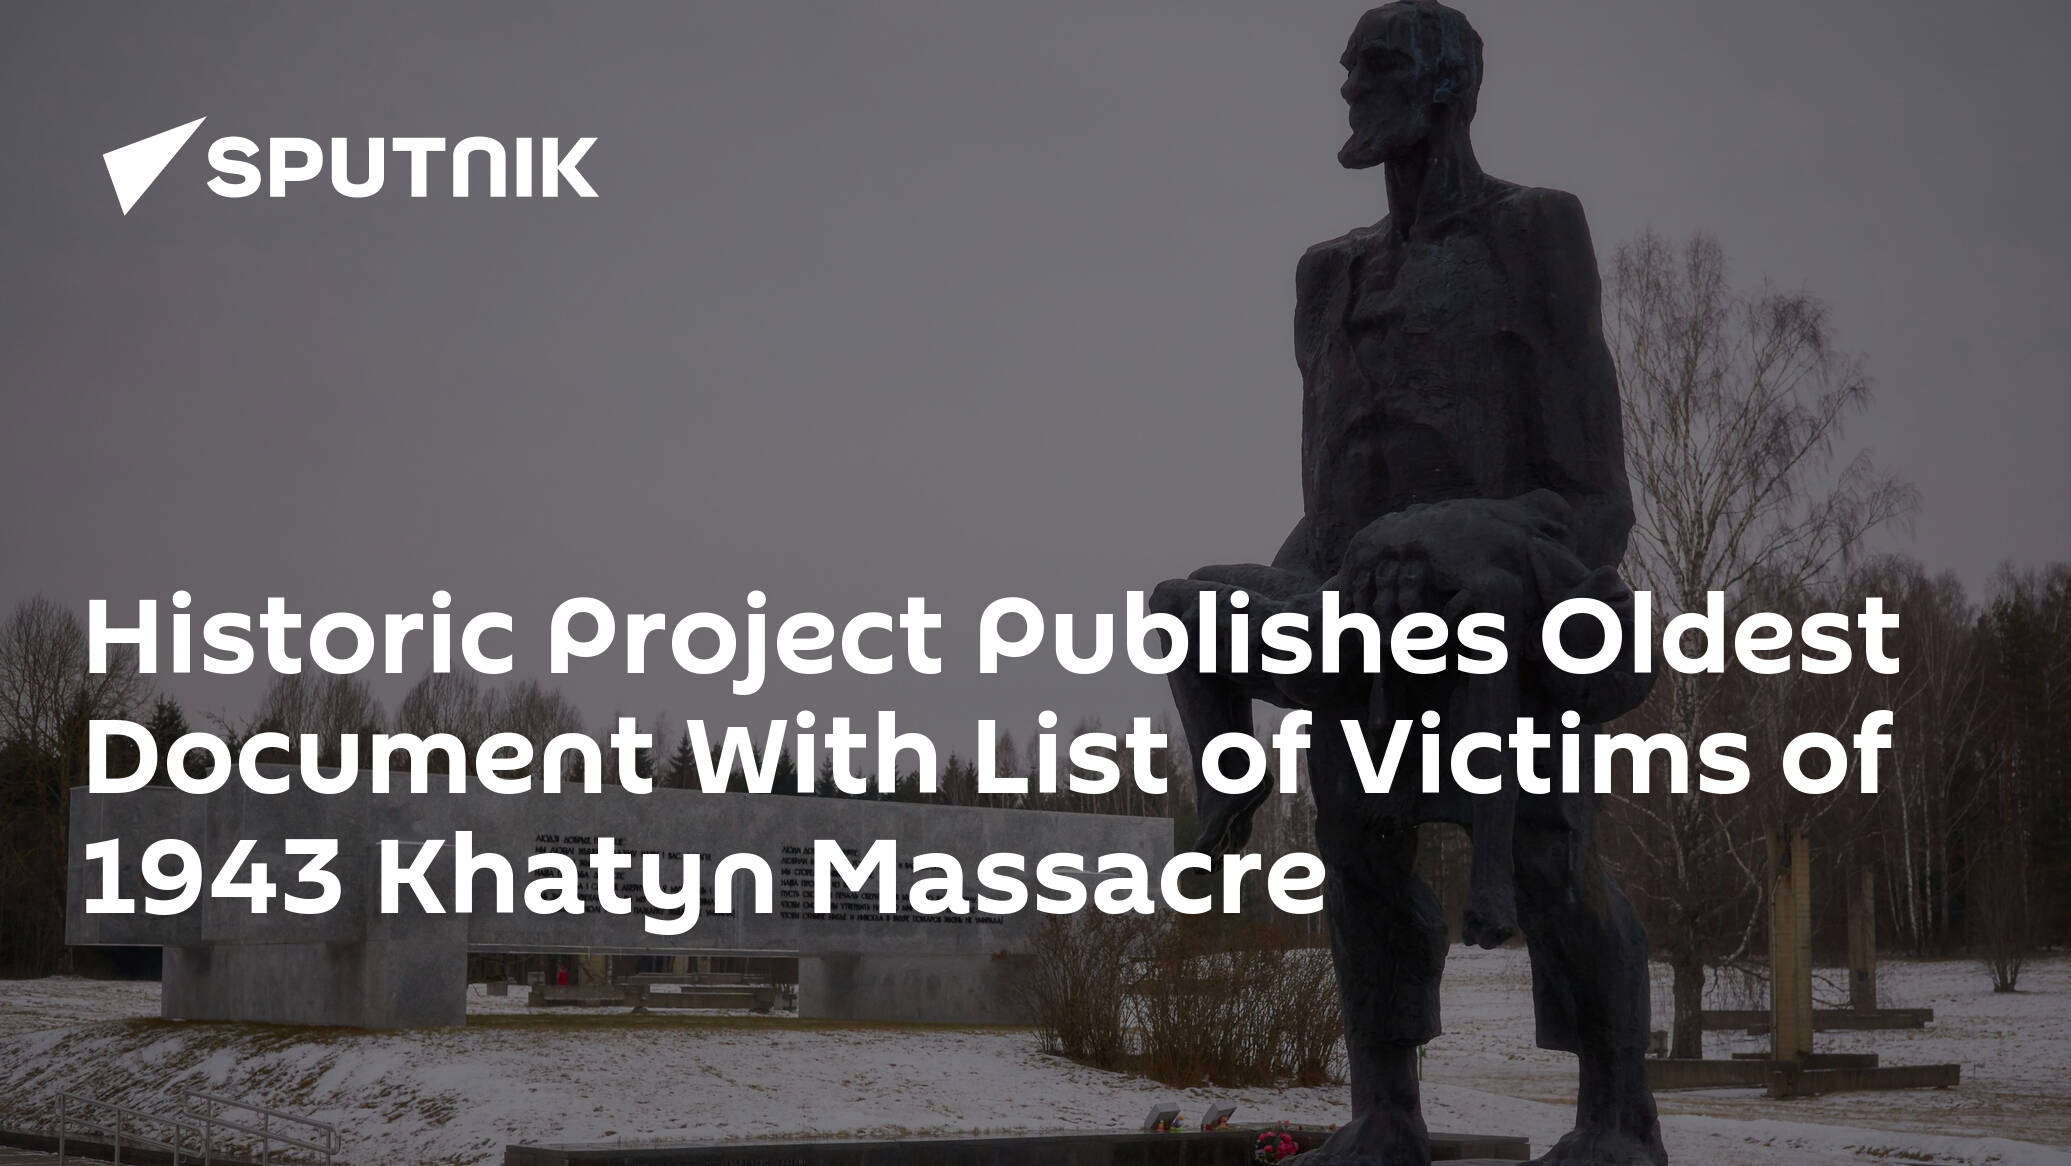 Historic Project Publishes Oldest Document With List of Victims of 1943 Khatyn Massacre